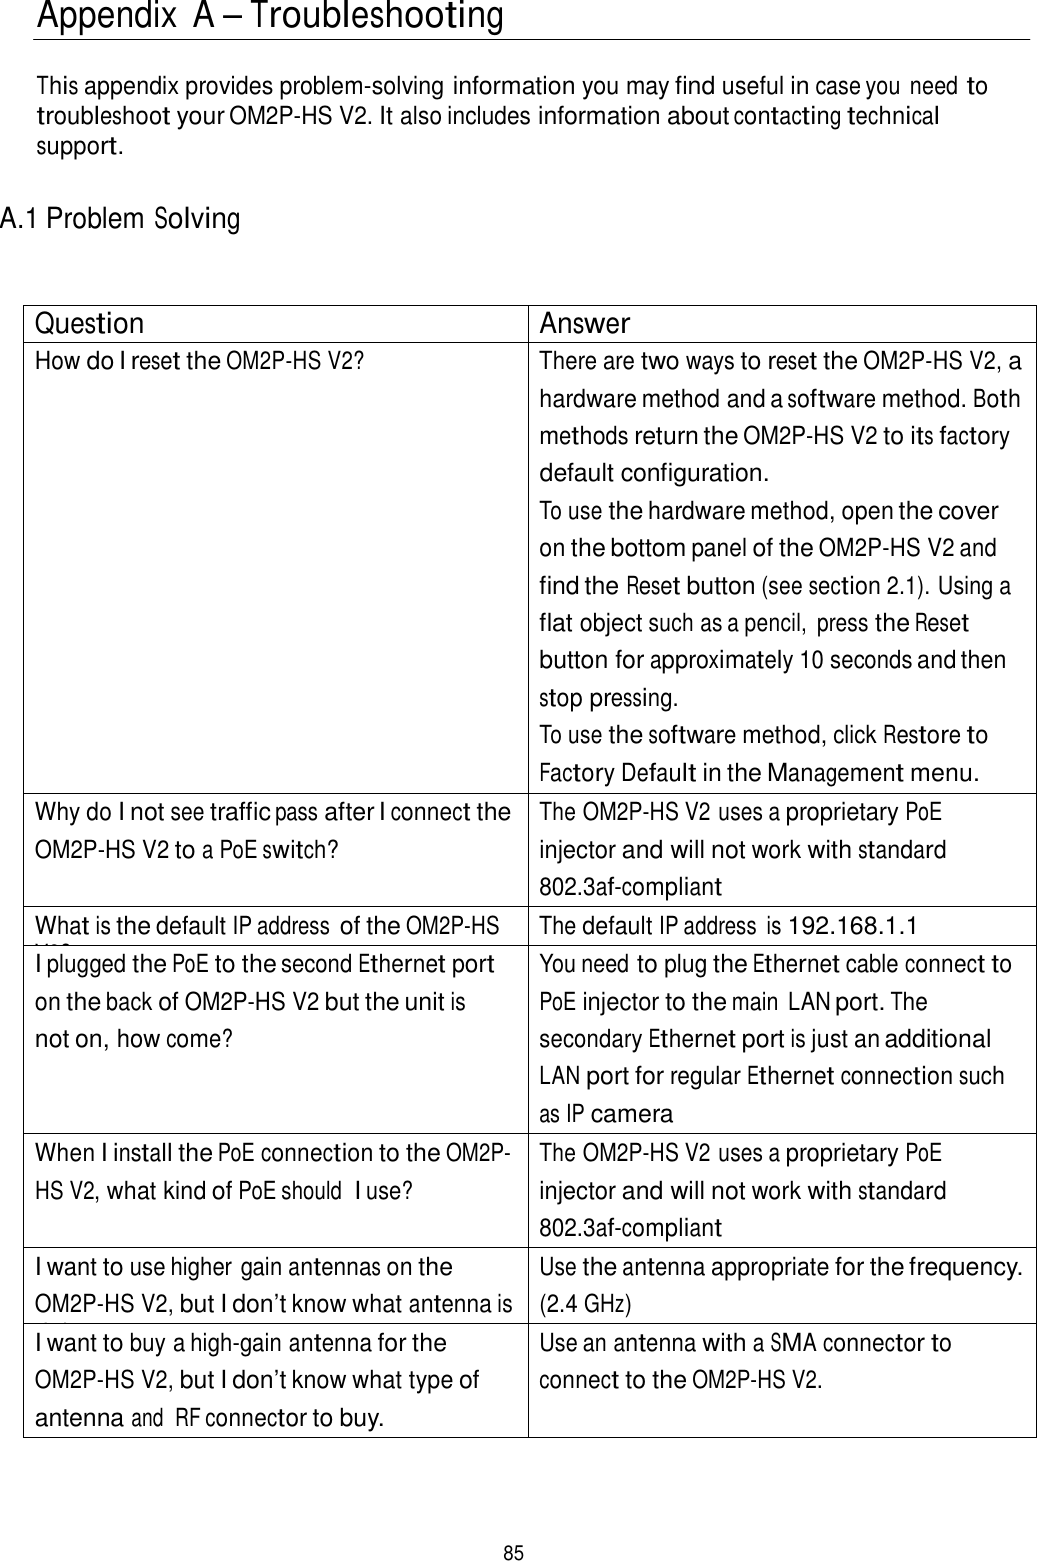  Appendix  A – Troubleshooting   This appendix provides problem-solving information you may find useful in case you need to troubleshoot your OM2P-HS V2. It also includes information about contacting technical support.   A.1 Problem Solving    Question Answer How do I reset the OM2P-HS V2? There are two ways to reset the OM2P-HS V2, a hardware method and a software method. Both methods return the OM2P-HS V2 to its factory default configuration. To use the hardware method, open the cover on the bottom panel of the OM2P-HS V2 and find the Reset button (see section 2.1). Using a flat object such as a pencil,  press the Reset button for approximately 10 seconds and then stop pressing. To use the software method, click Restore to Factory Default in the Management menu. Why do I not see traffic pass after I connect the OM2P-HS V2 to a PoE switch? The OM2P-HS V2 uses a proprietary PoE injector and will not work with standard 802.3af-compliant What is the default IP address of the OM2P-HS V2? The default IP address  is 192.168.1.1 I plugged the PoE to the second Ethernet port on the back of OM2P-HS V2 but the unit is not on, how come? You need to plug the Ethernet cable connect to PoE injector to the main  LAN port. The secondary Ethernet port is just an additional LAN port for regular Ethernet connection such as IP camera When I install the PoE connection to the OM2P-HS V2, what kind of PoE should  I use? The OM2P-HS V2 uses a proprietary PoE injector and will not work with standard 802.3af-compliant I want to use higher gain antennas on the OM2P-HS V2, but I don’t know what antenna is right. Use the antenna appropriate for the frequency. (2.4 GHz) I want to buy a high-gain antenna for the OM2P-HS V2, but I don’t know what type of antenna and  RF connector to buy. Use an antenna with a SMA connector to connect to the OM2P-HS V2.      85 